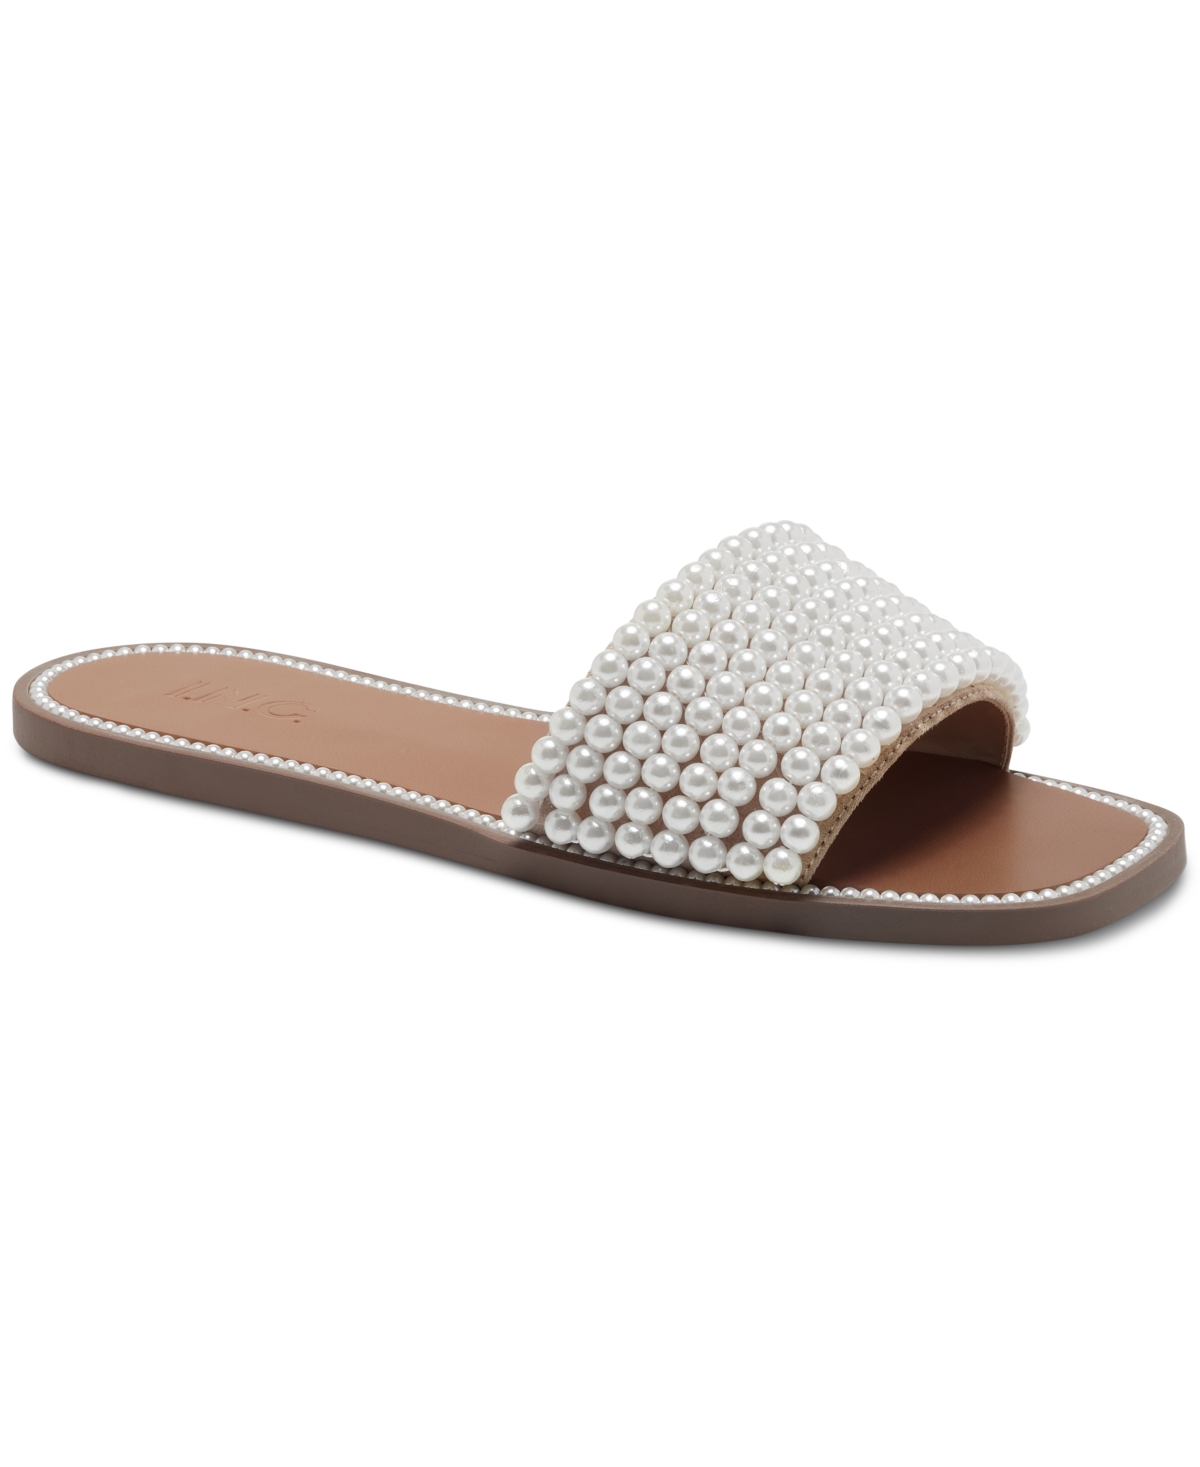 Pelle Flat Slide Sandals, Created for Macy's - Pearl